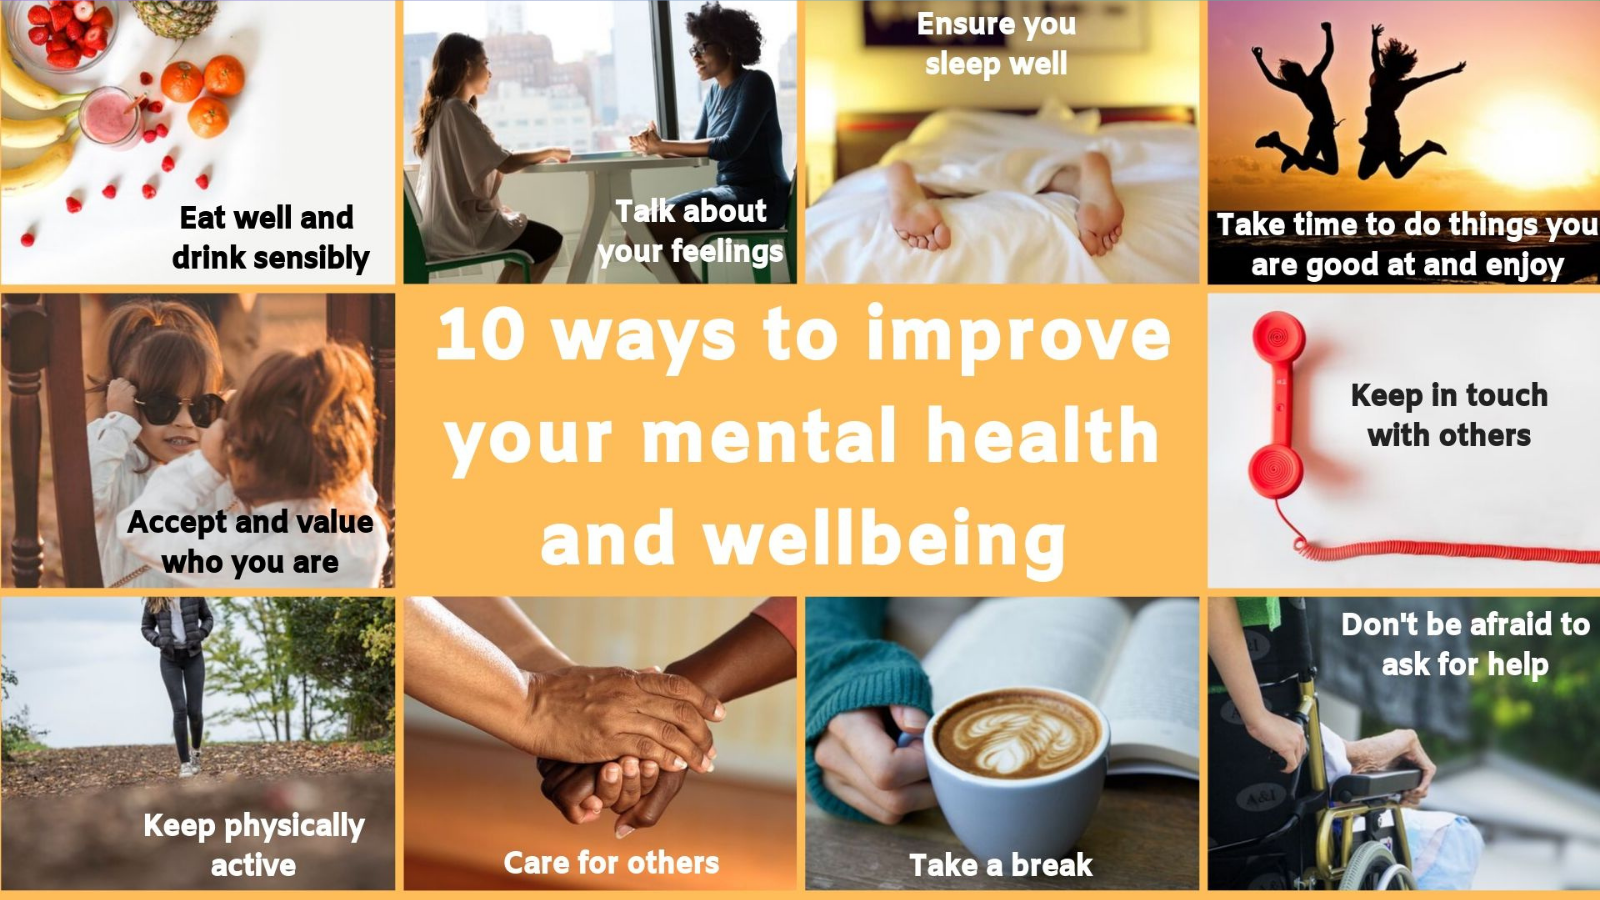 10 ways to improve your mental health and wellbeing